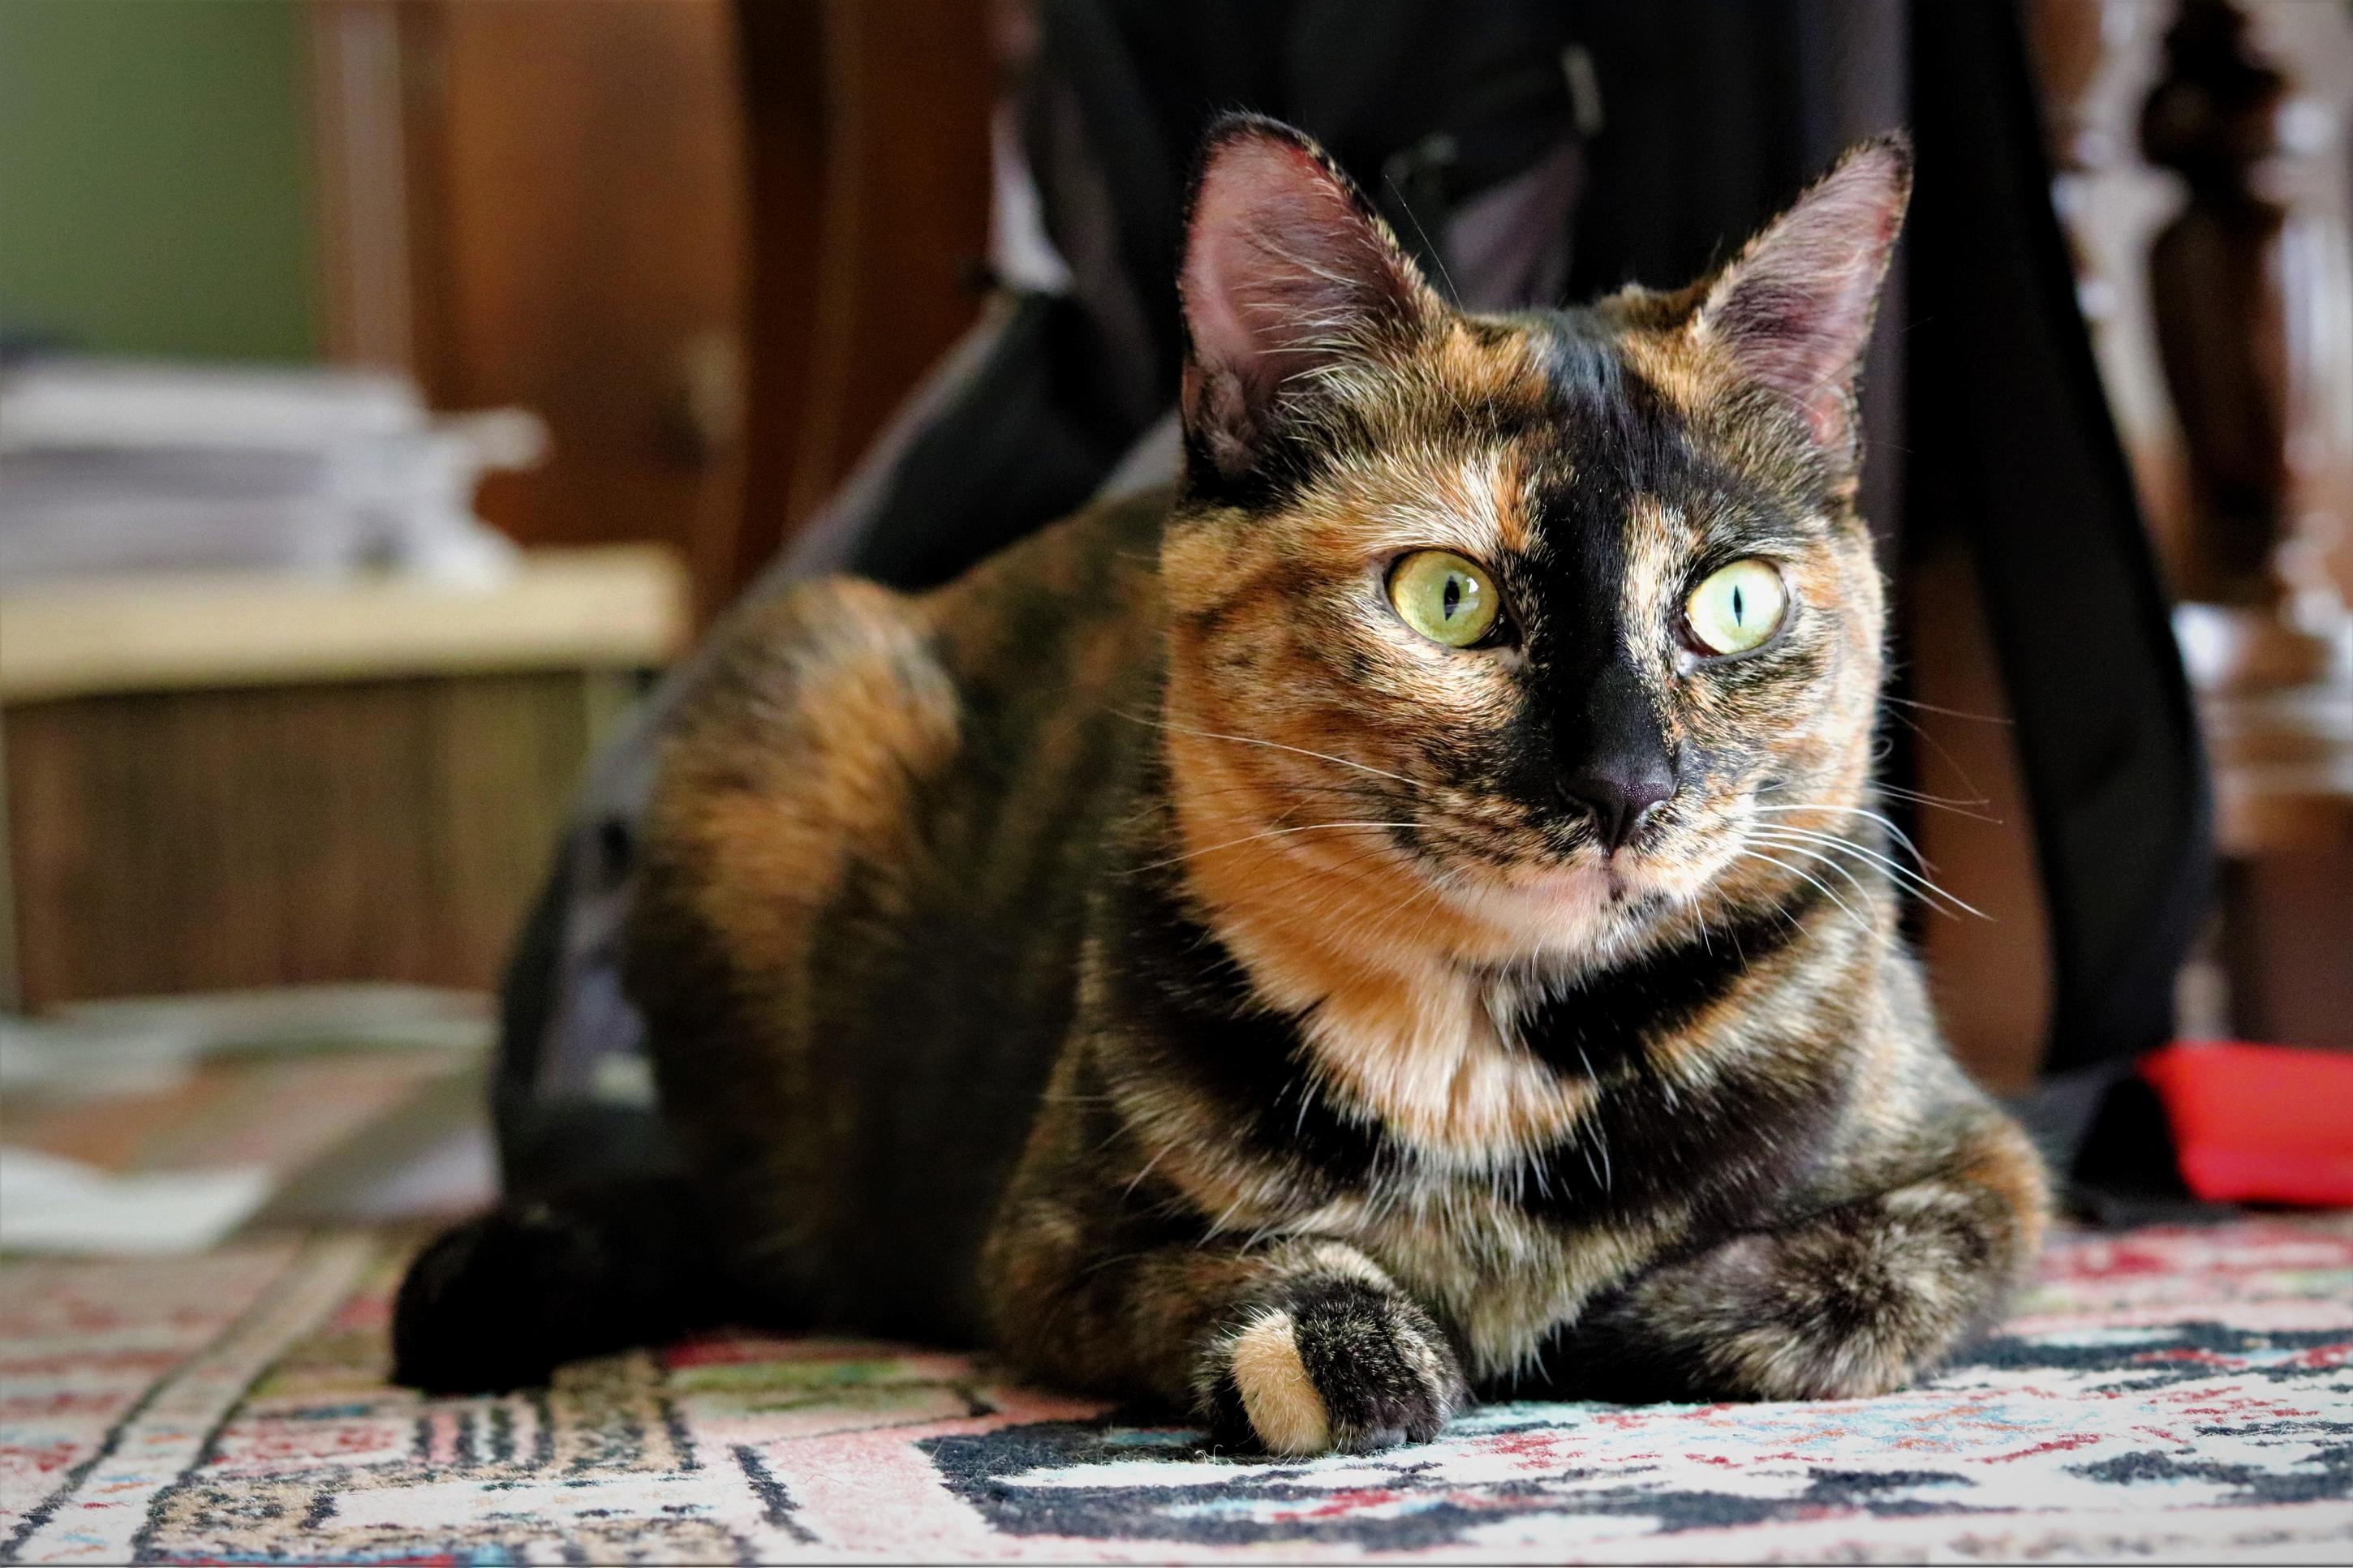 Bought a new camera, decided to test it out on my cats. heres a good pic.